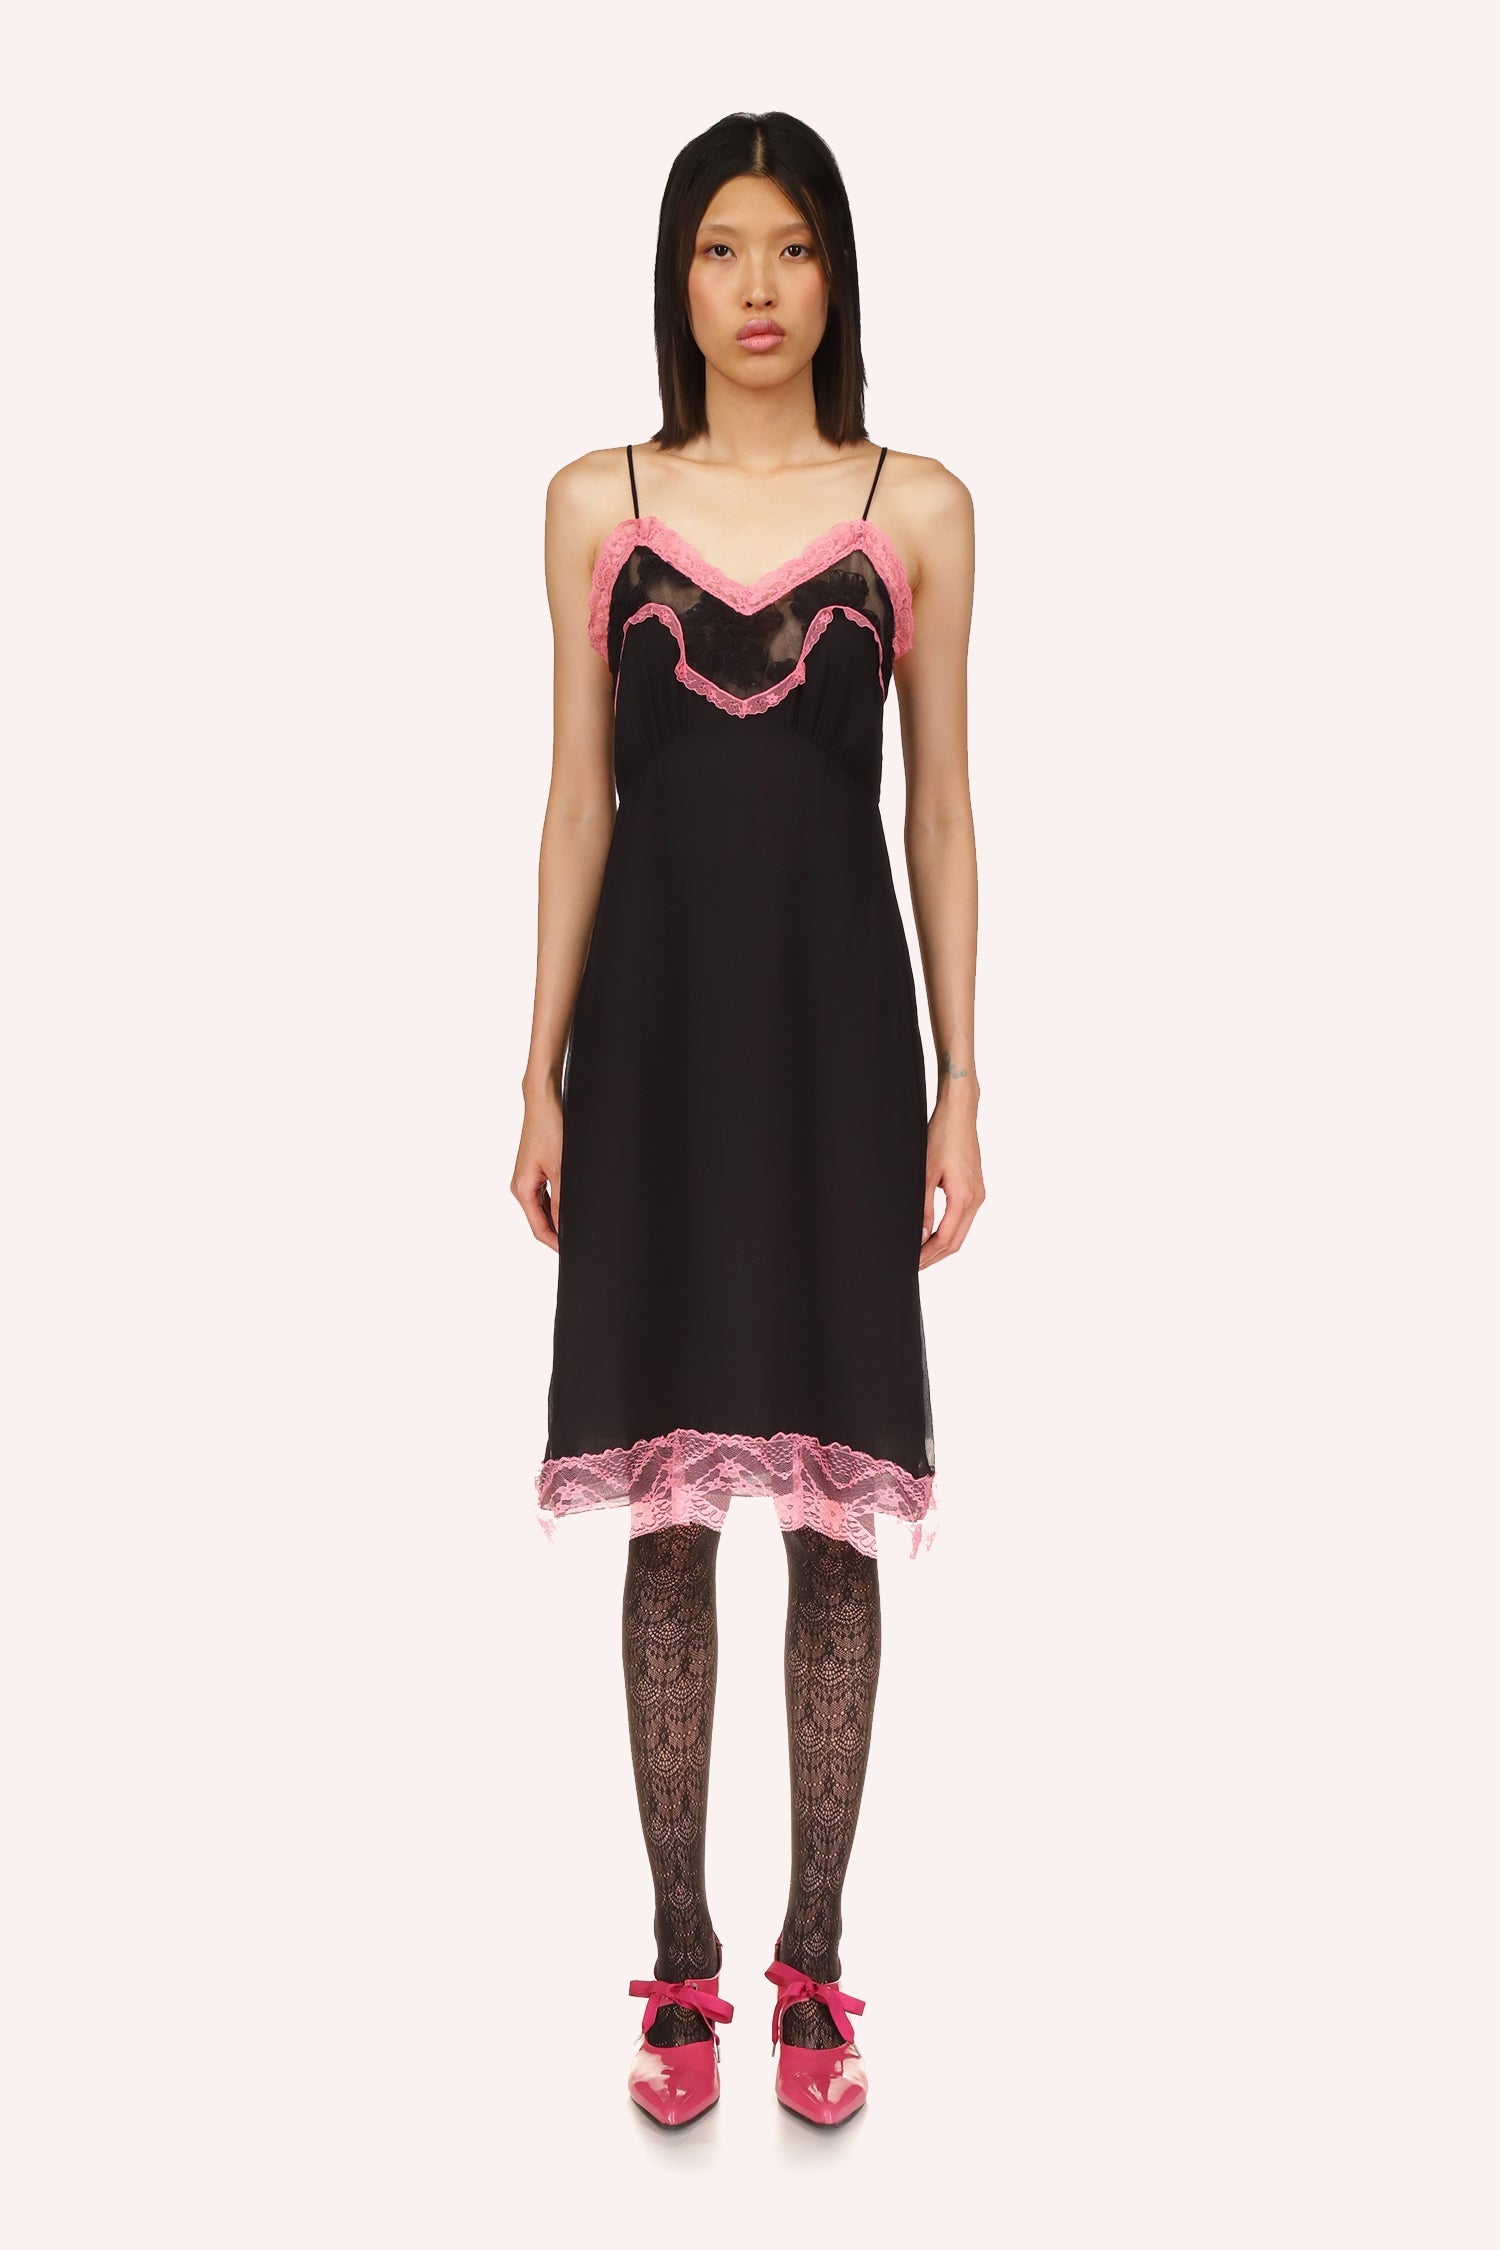 Chiffon Slip Dress Rose, by Anna Sui, offers a dress, black with rose highlight lace a top and bottom